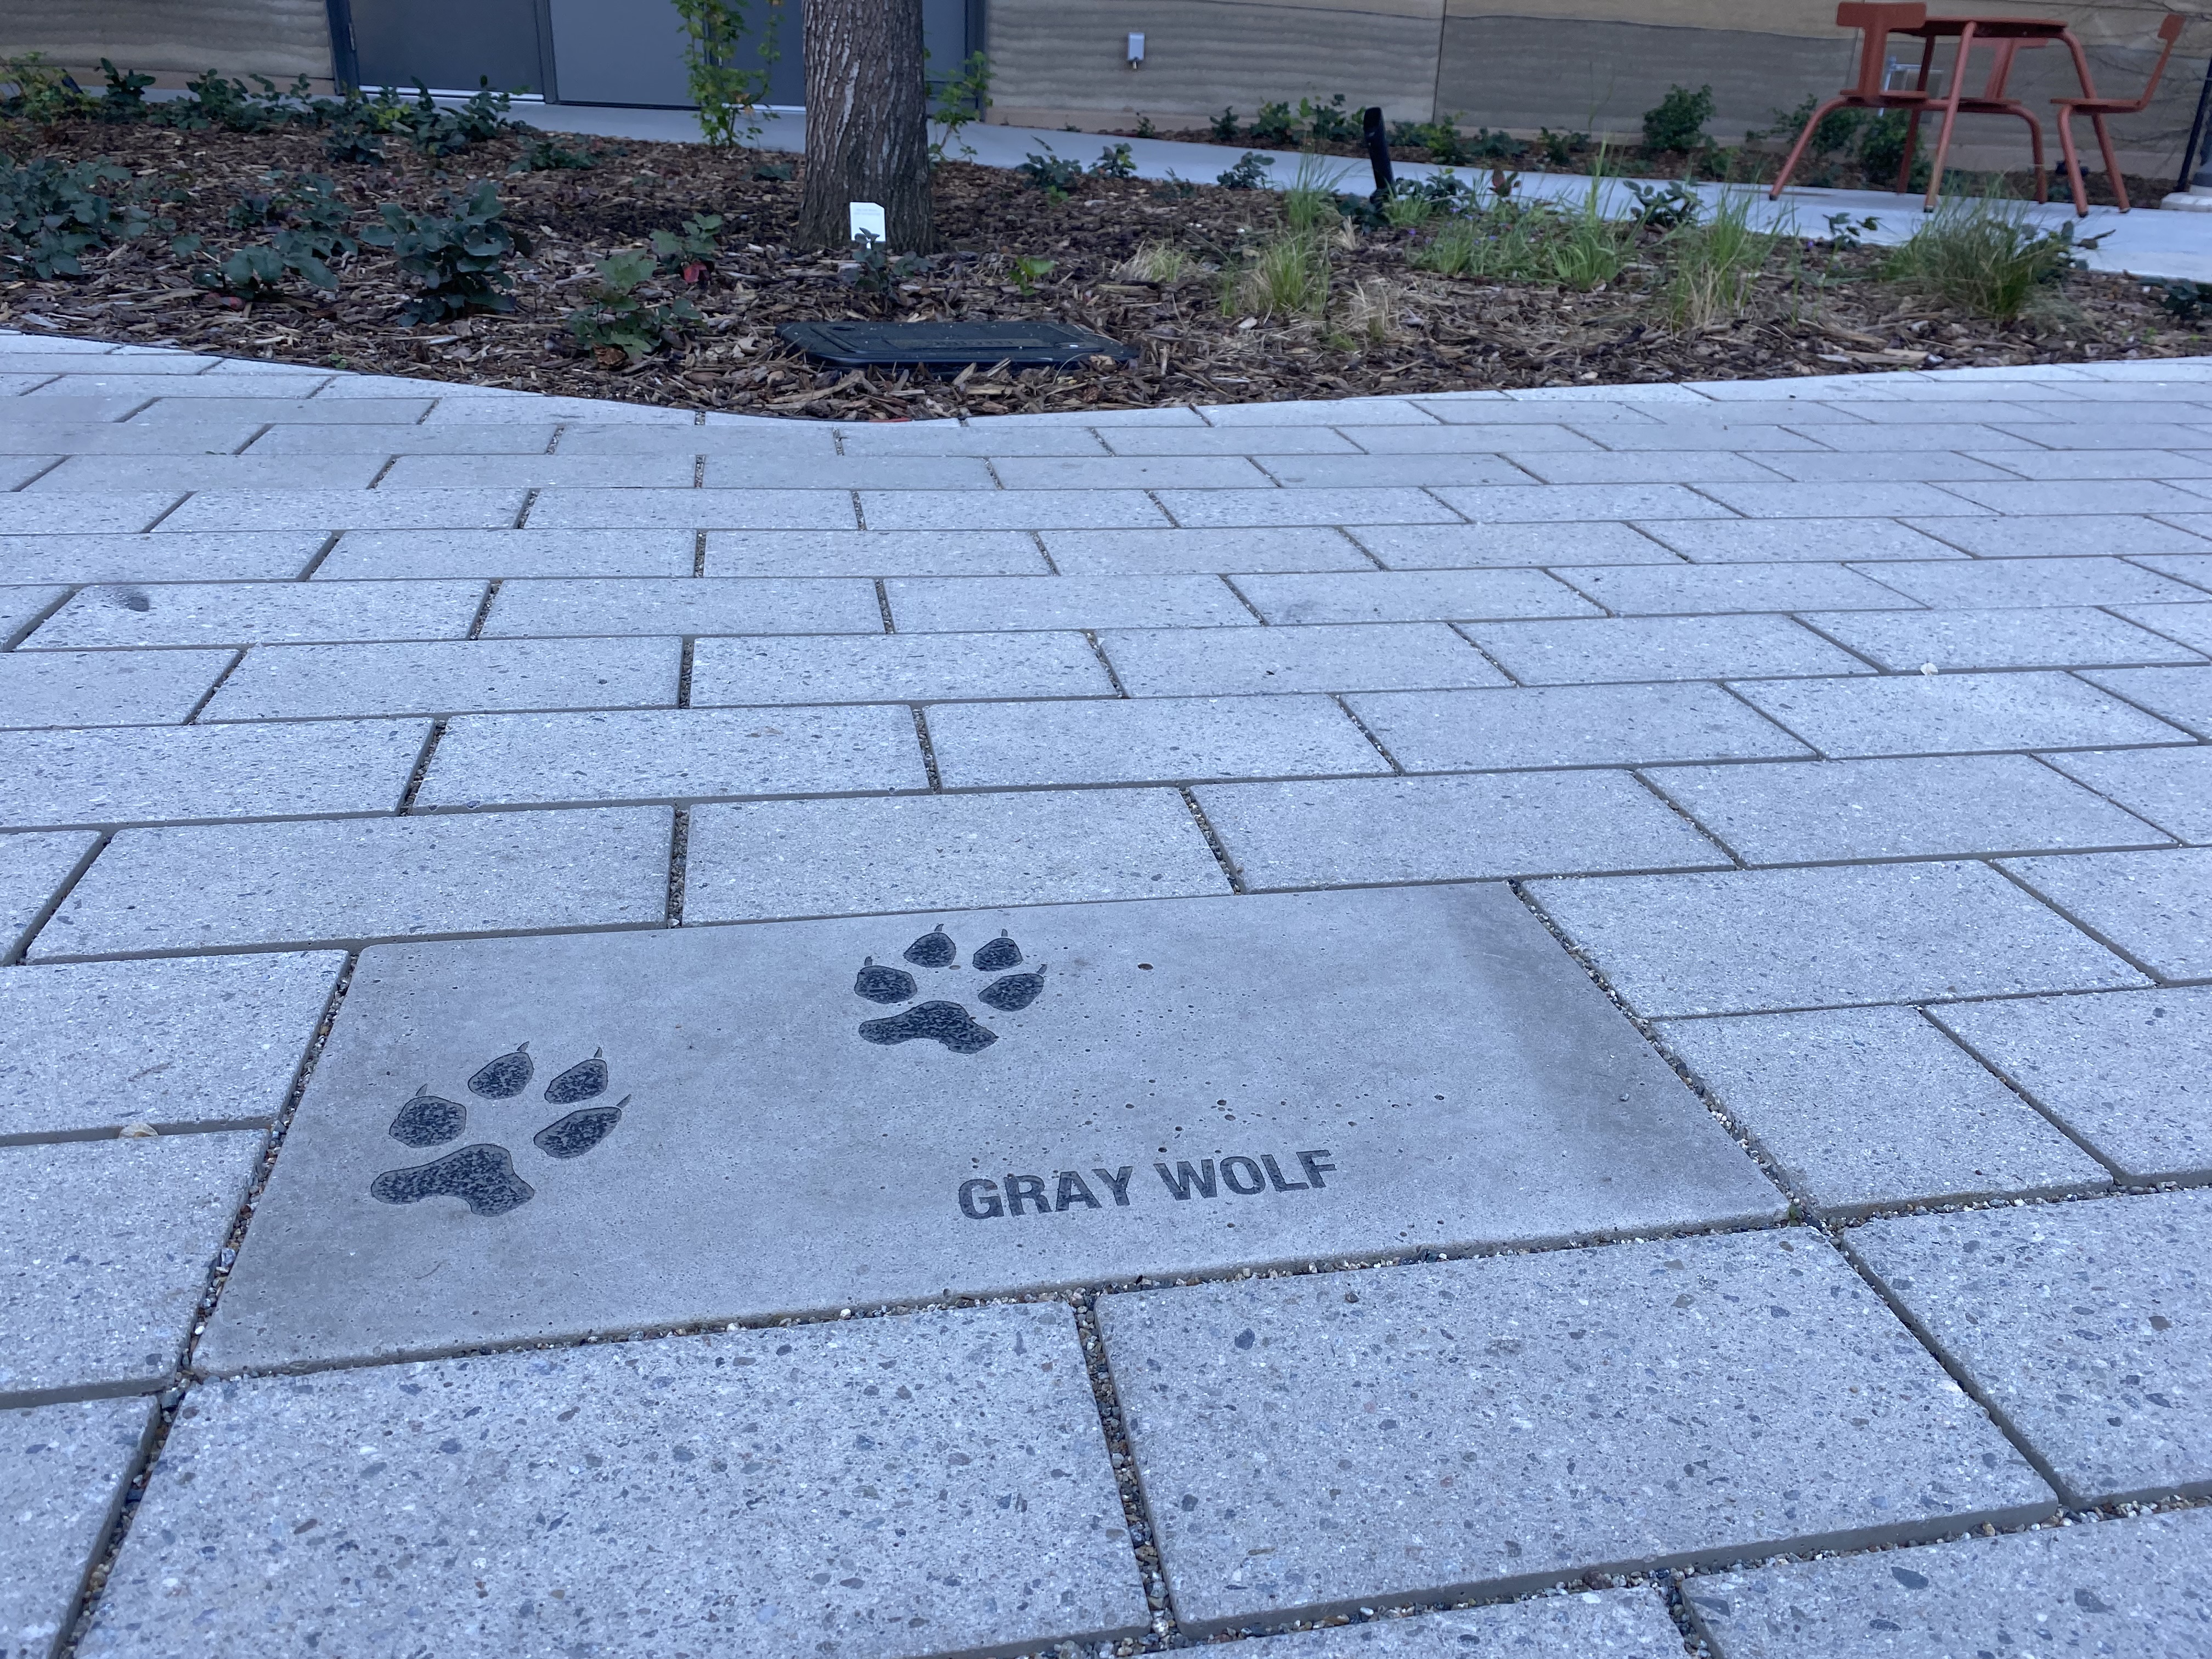 Tracks from a Gray Wolf are paved into the pavement at the California Natural Resources Headquarters